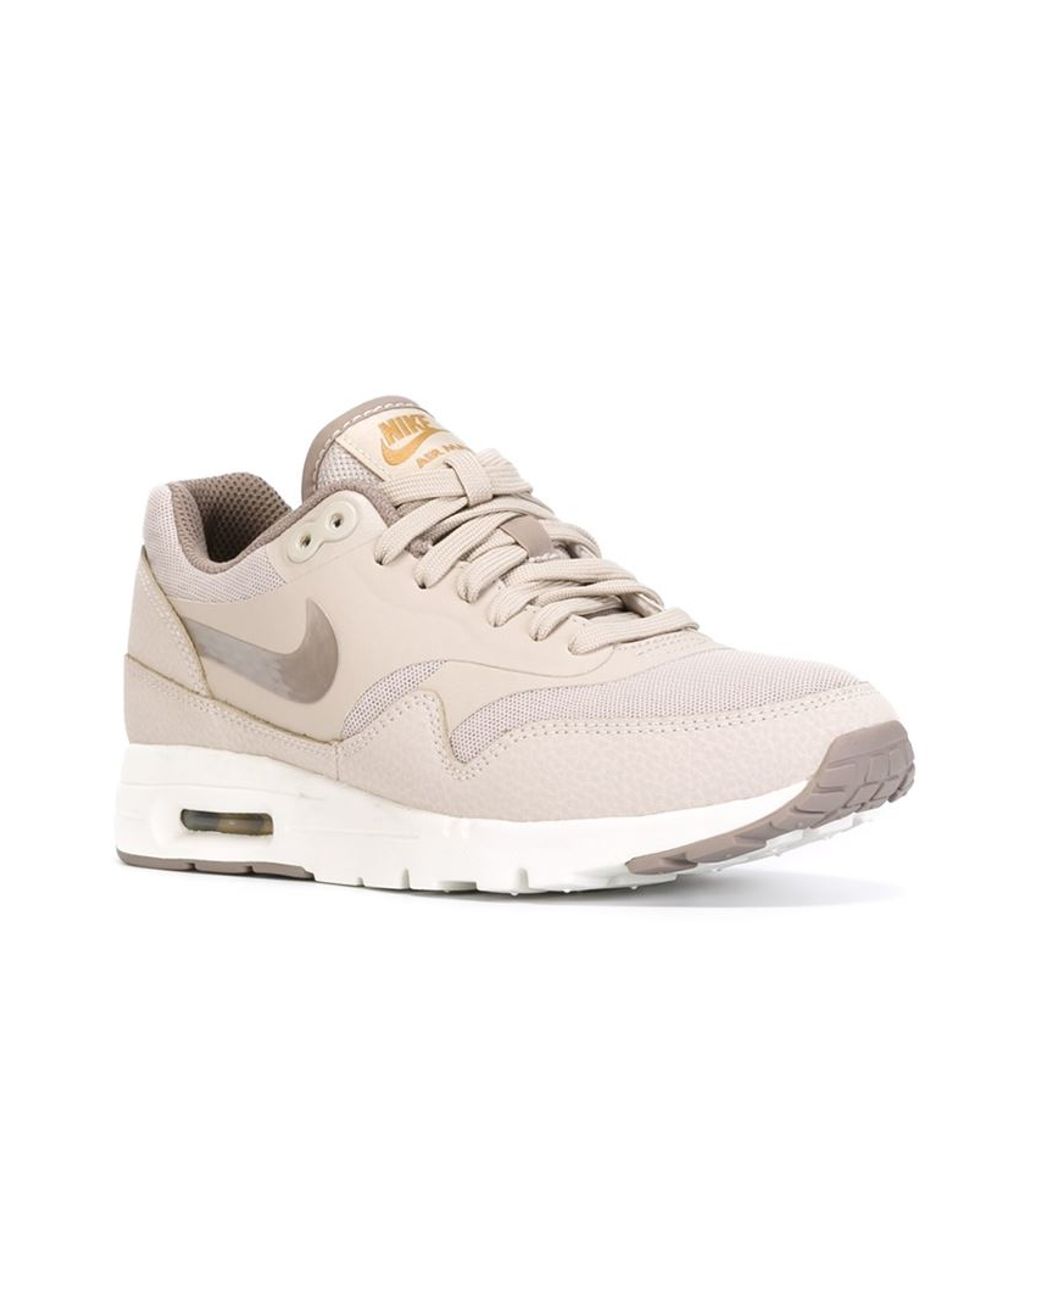 'Air Max 1 Ultra Essential' Sneakers in Gray Lyst